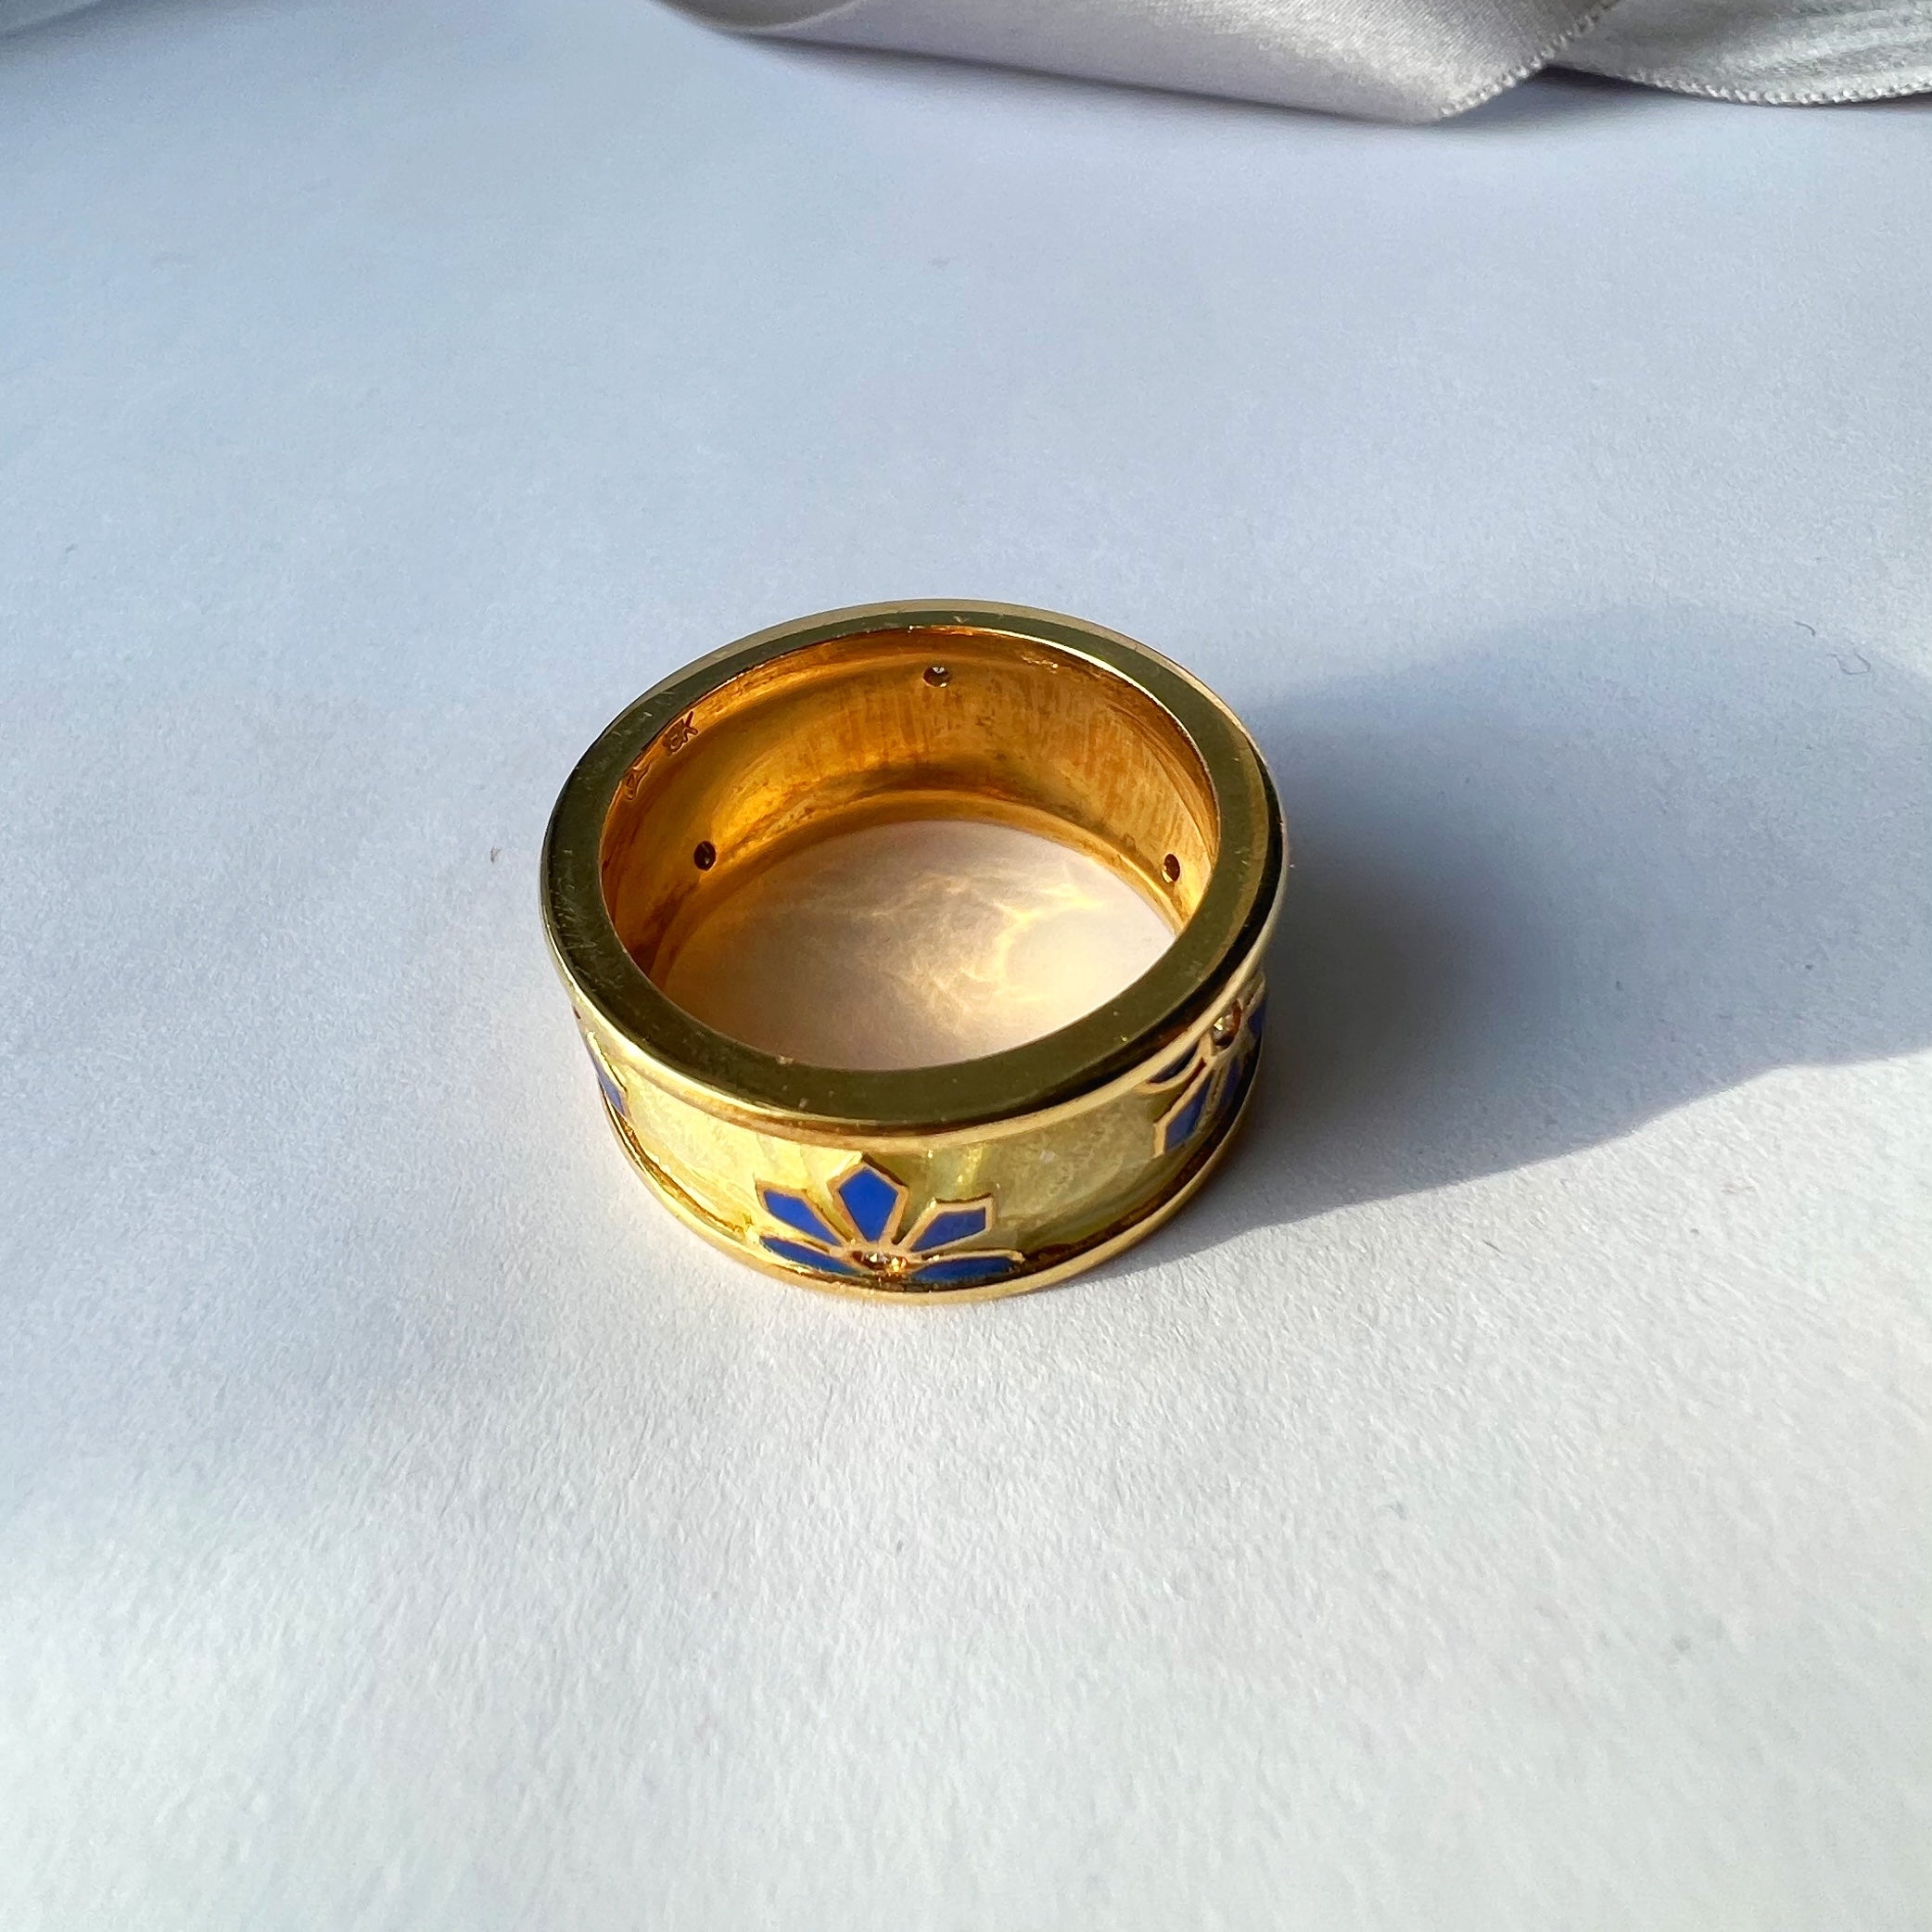 Enamel and 18ct Gold Band